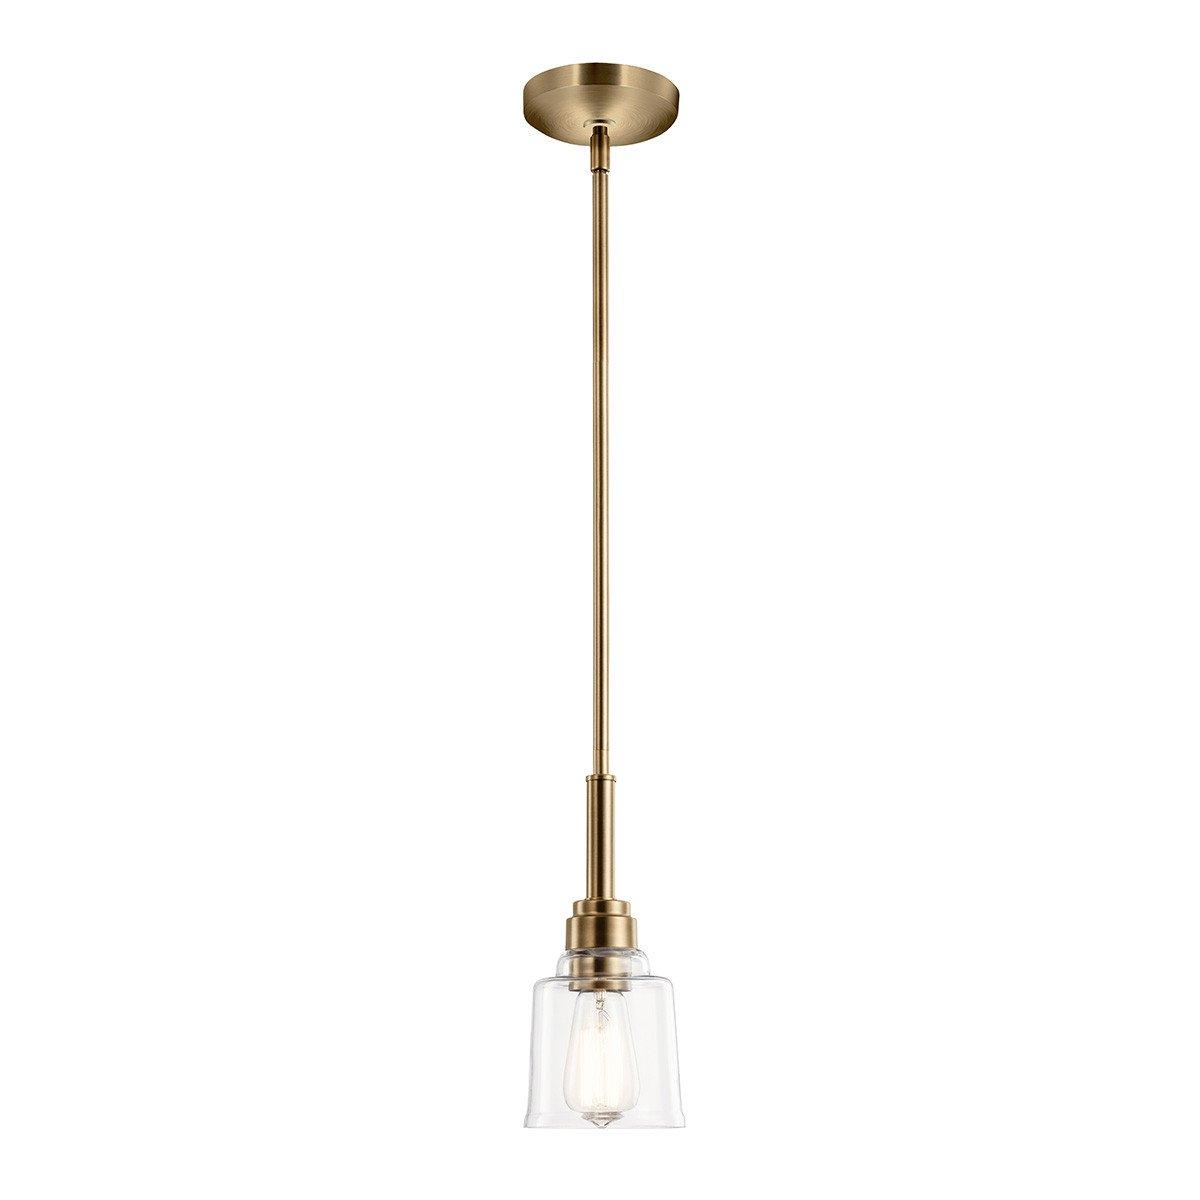 Kichler Aivian Dome Pendant Ceiling Light Weathered Brass